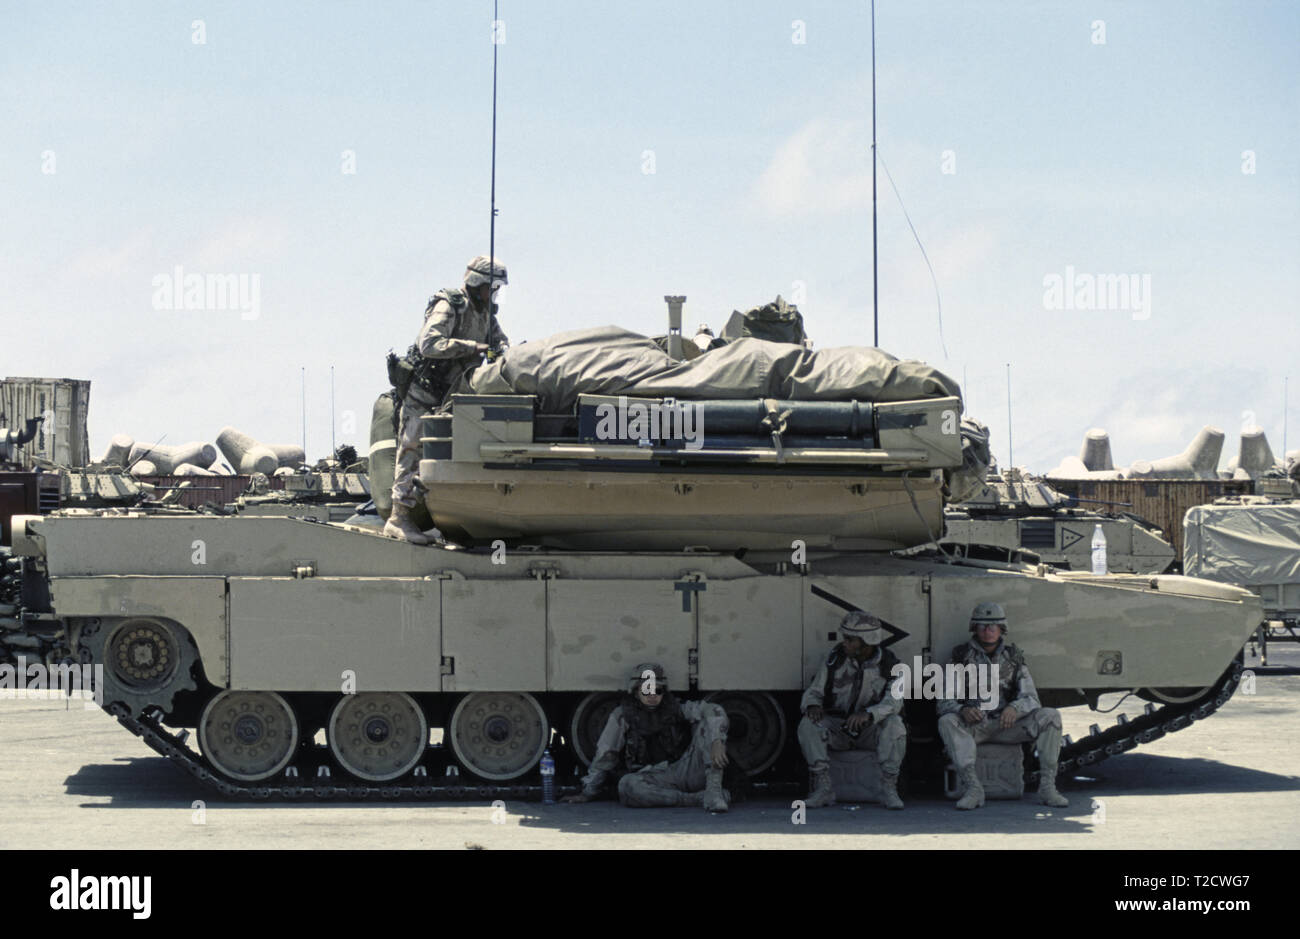 30th October 1993 U.S. Army soldiers shelter from the fierce heat in the shade of their M1A1 Abrams tank of the 24th Infantry Division, 1st Battalion of the 64th Armored Regiment. They have just arrived in the new port in Mogadishu, Somalia. Stock Photo